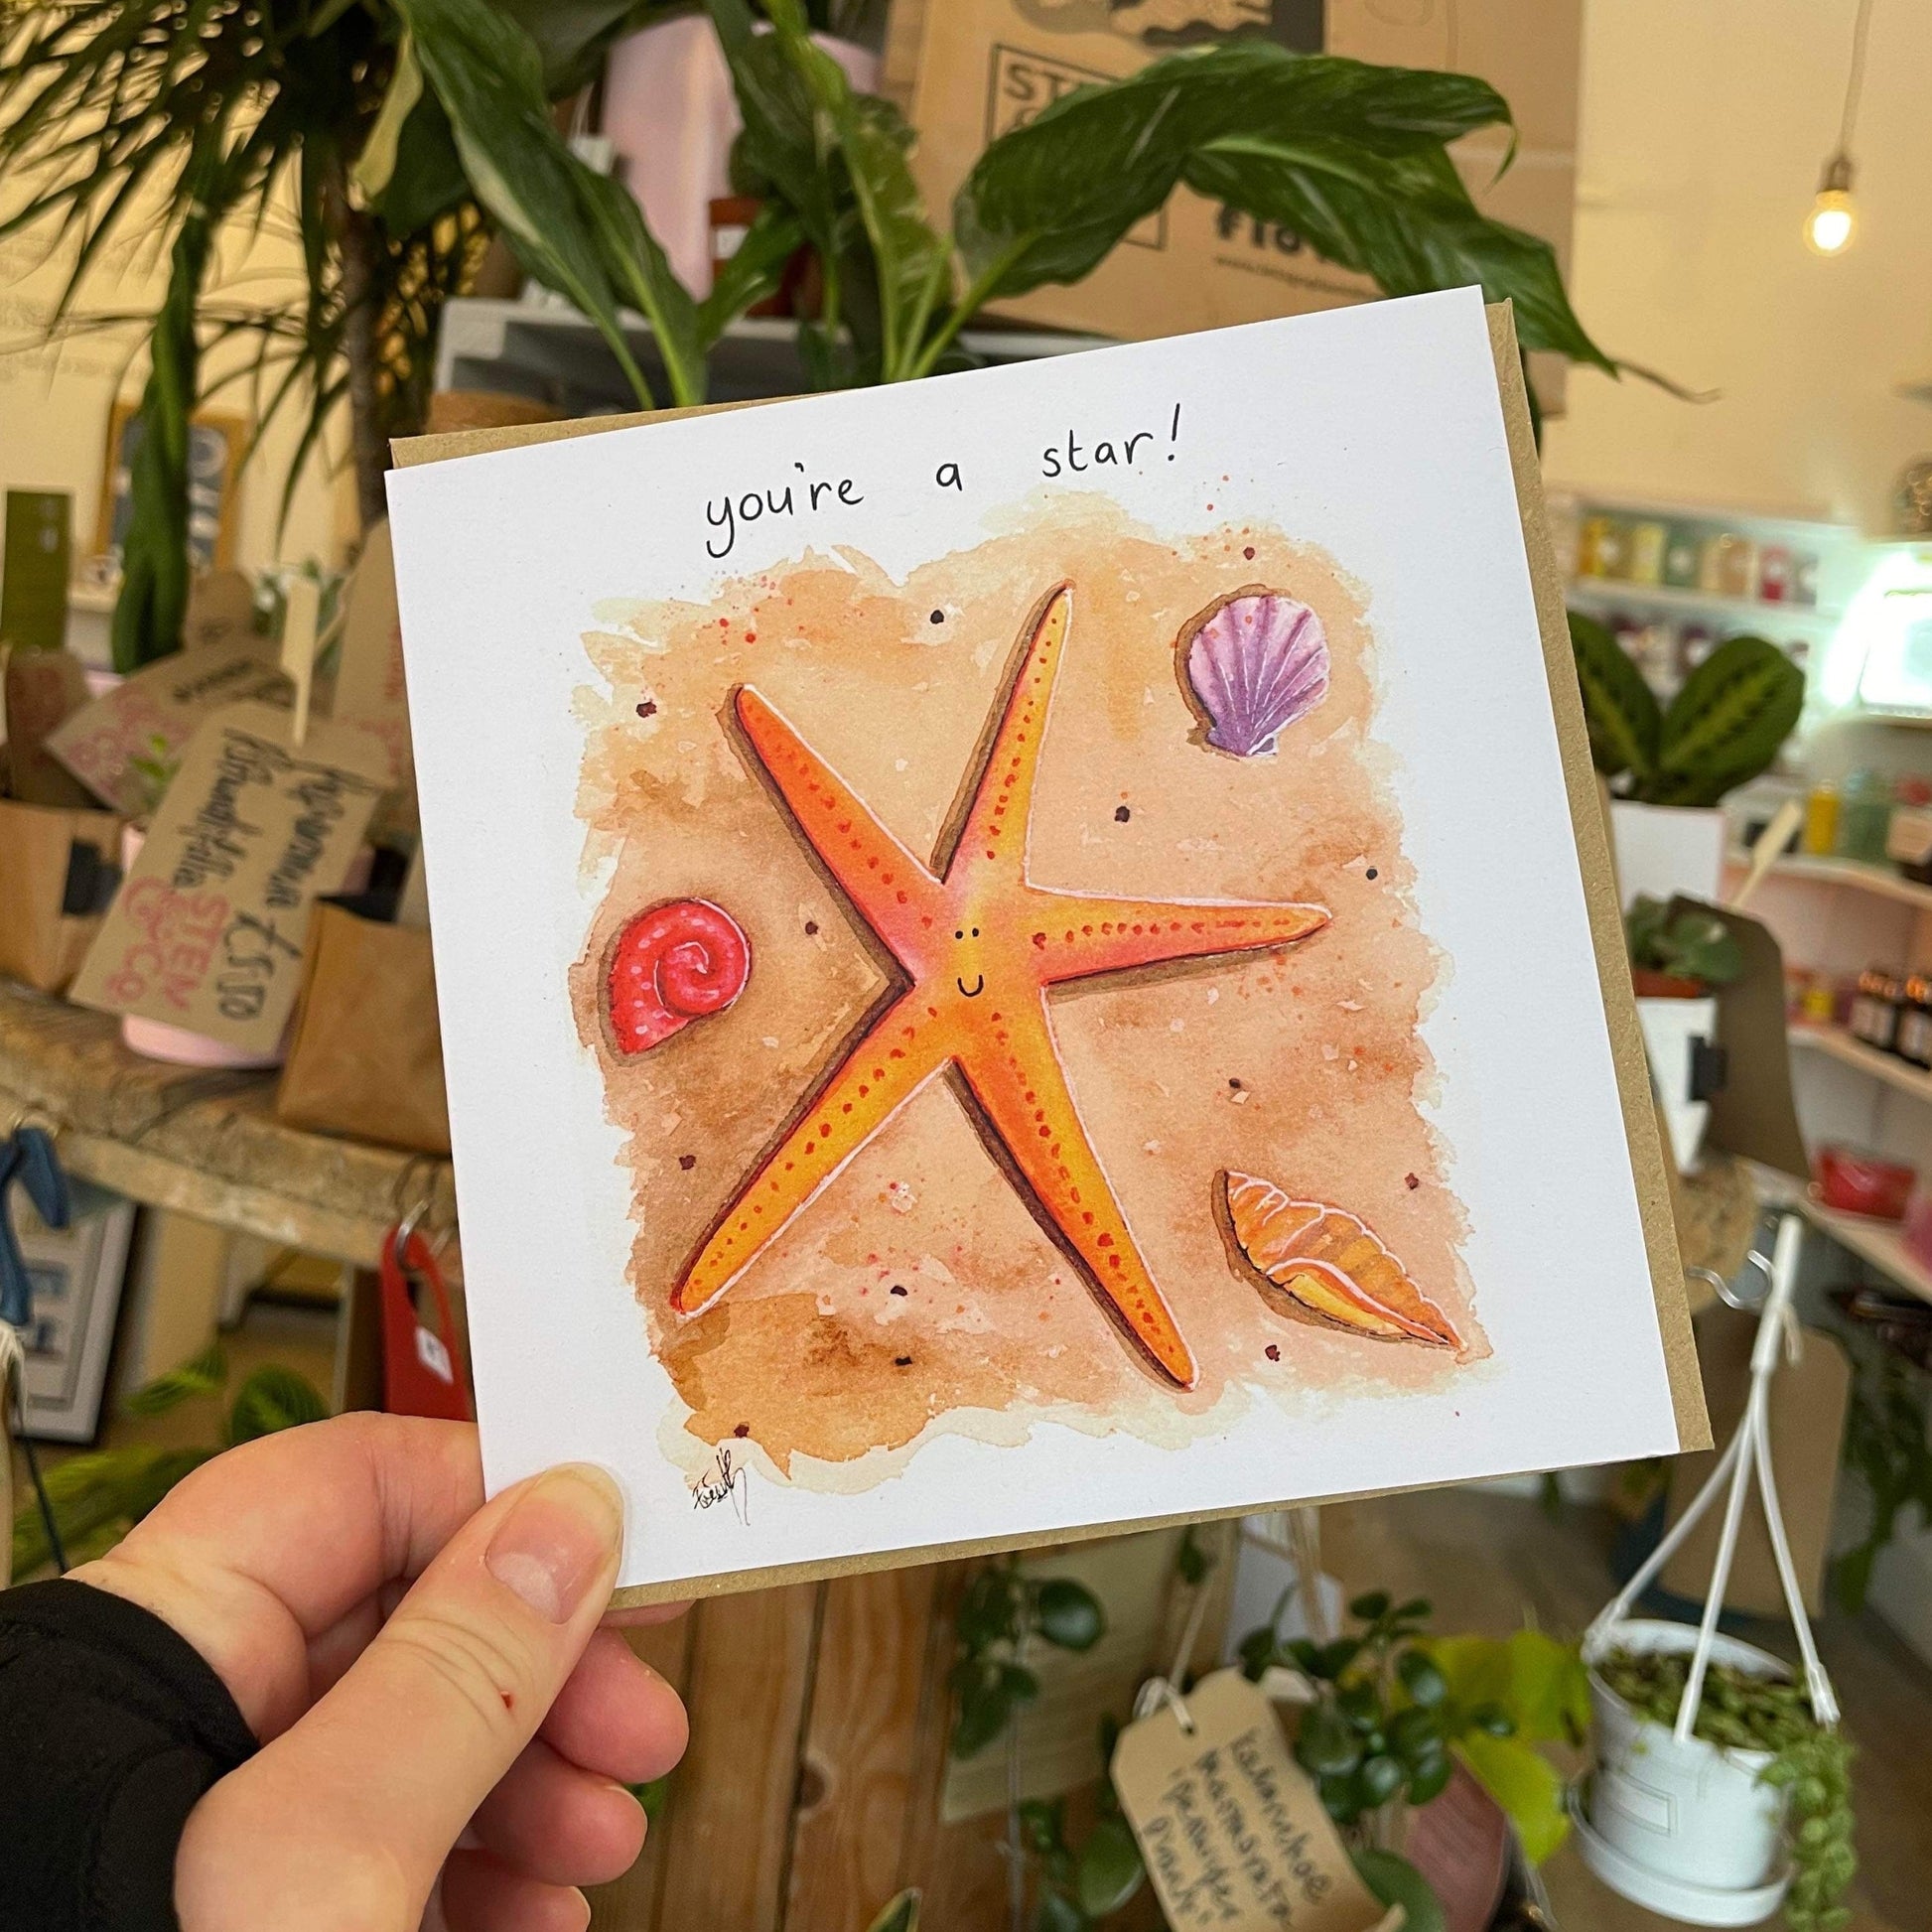 A cheerful greetings card designed by Eve Leoni Smith, featuring a starfish illustration and the quote, 'You're a star!'.